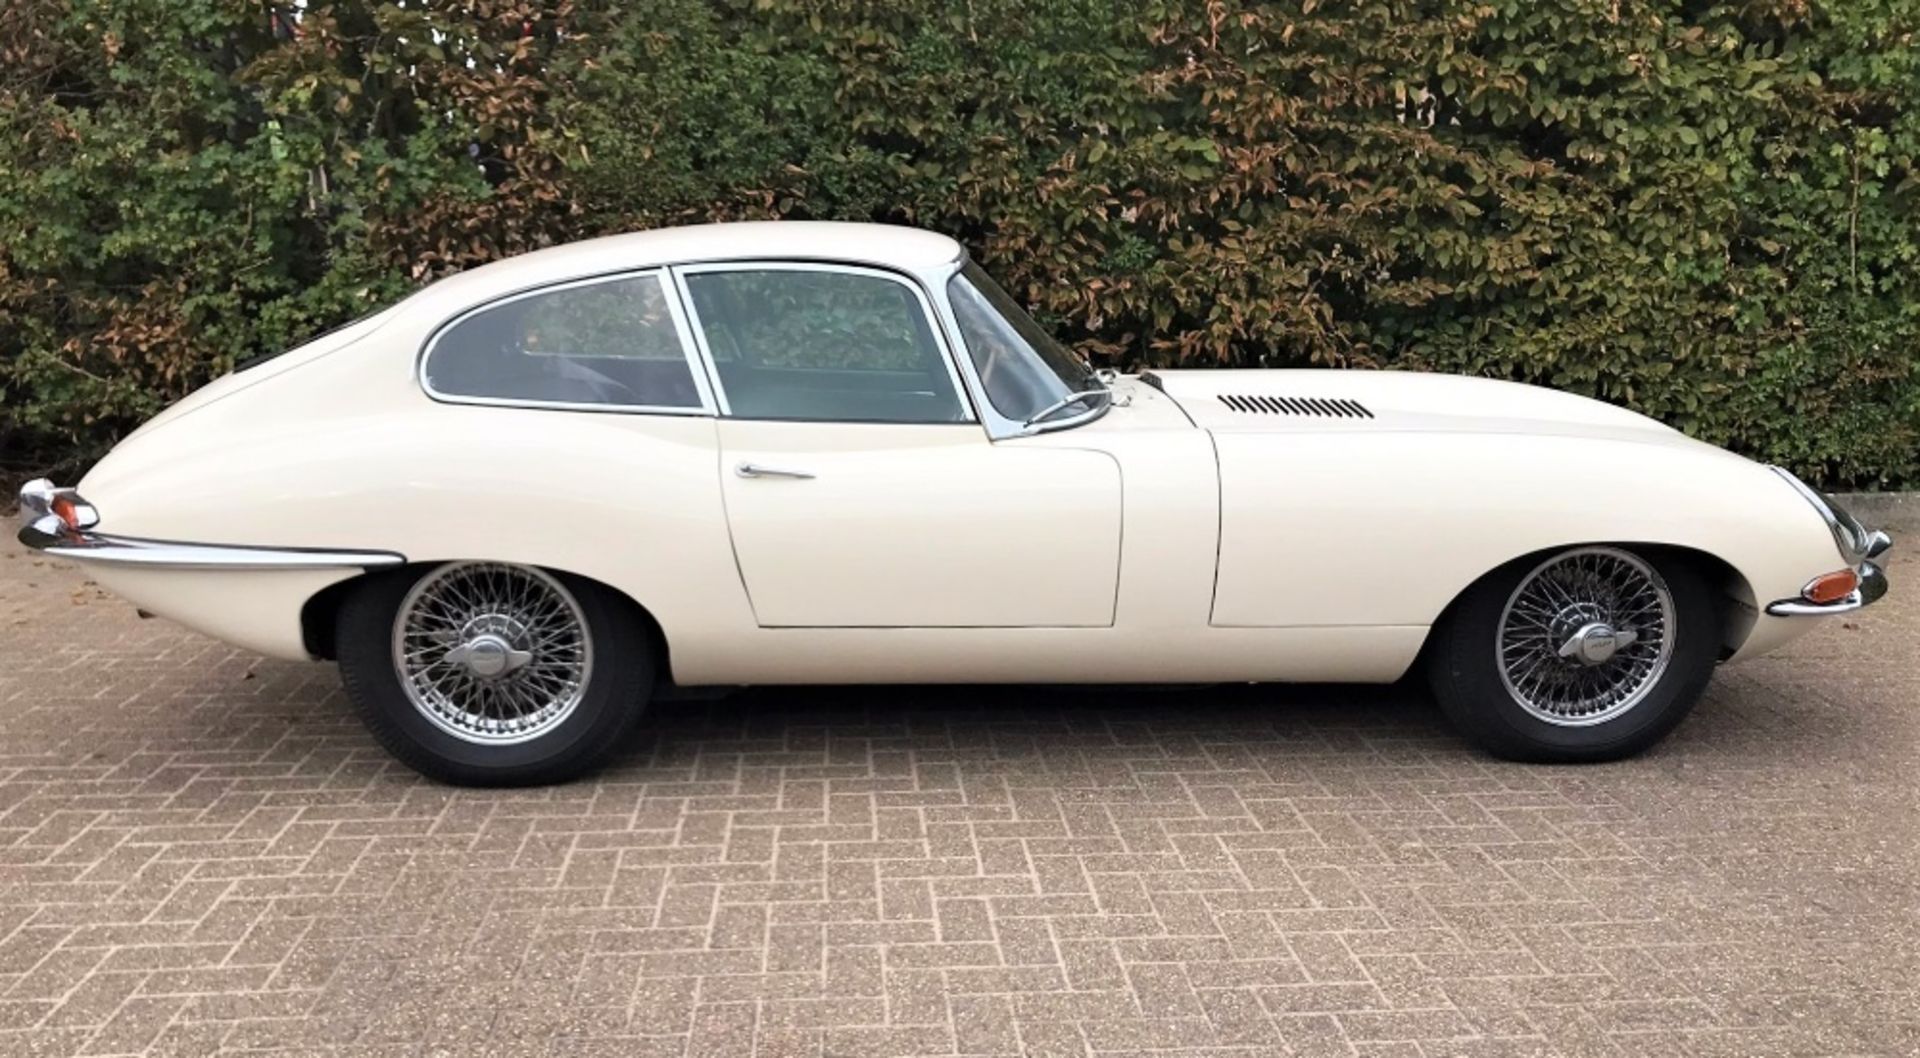 1962 JAGUAR E-TYPE SERIES I FIXED HEAD COUPE Registration Number: 696 VC Chassis Number: 860911 - Image 6 of 12